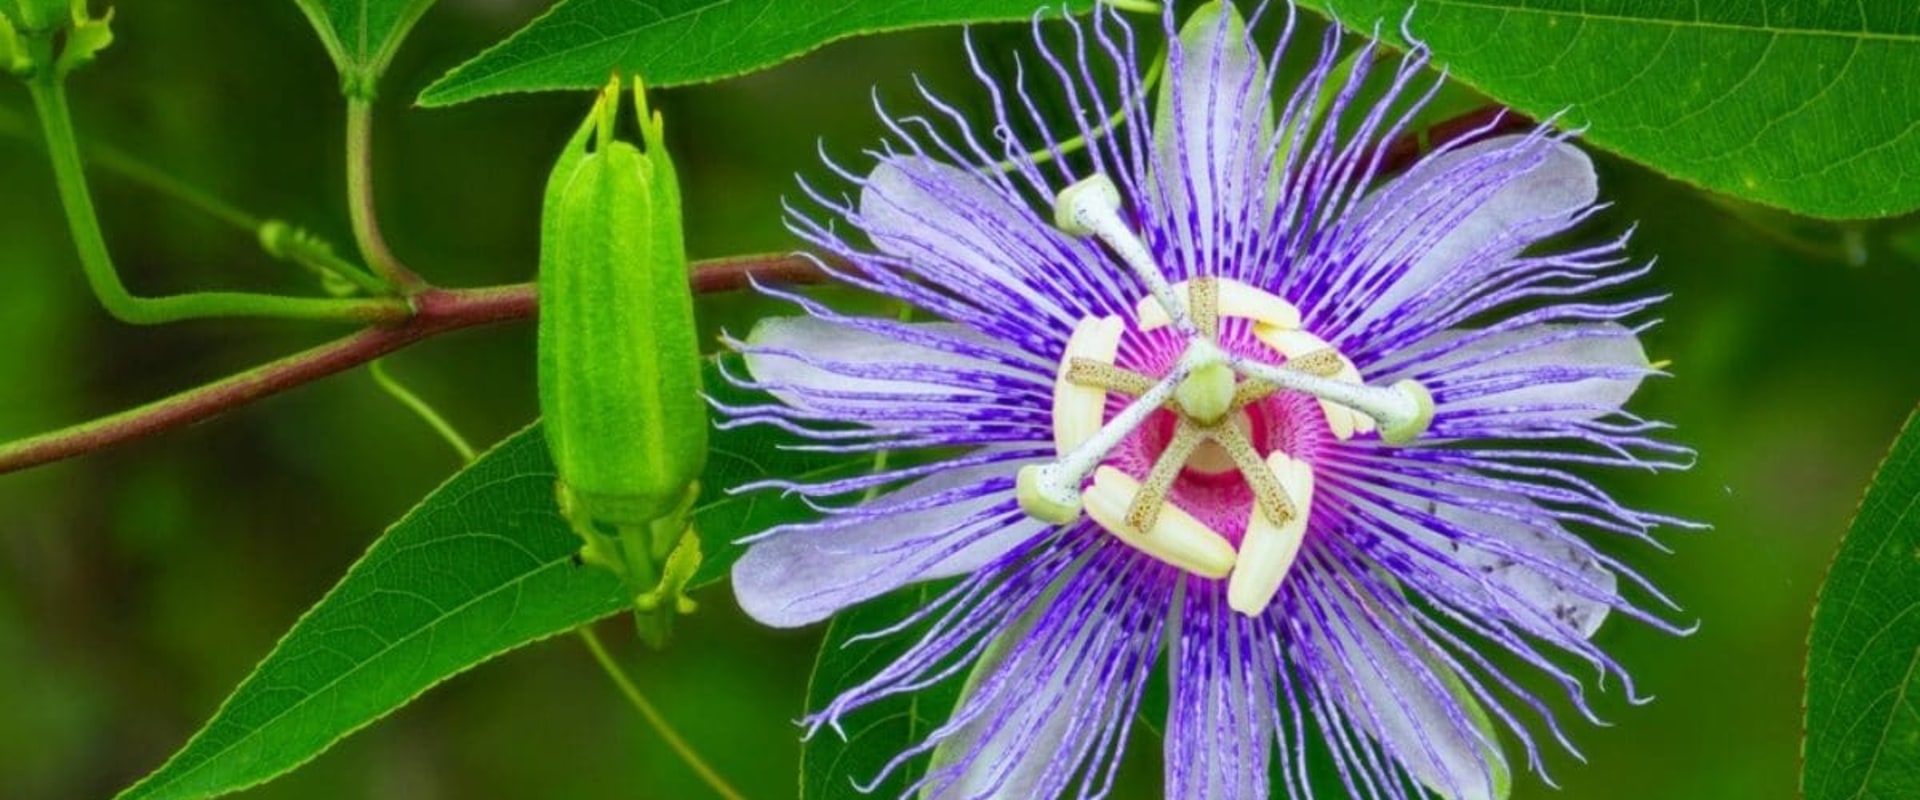 Native Plants for Central Florida Woodlands: A Guide for Gardeners